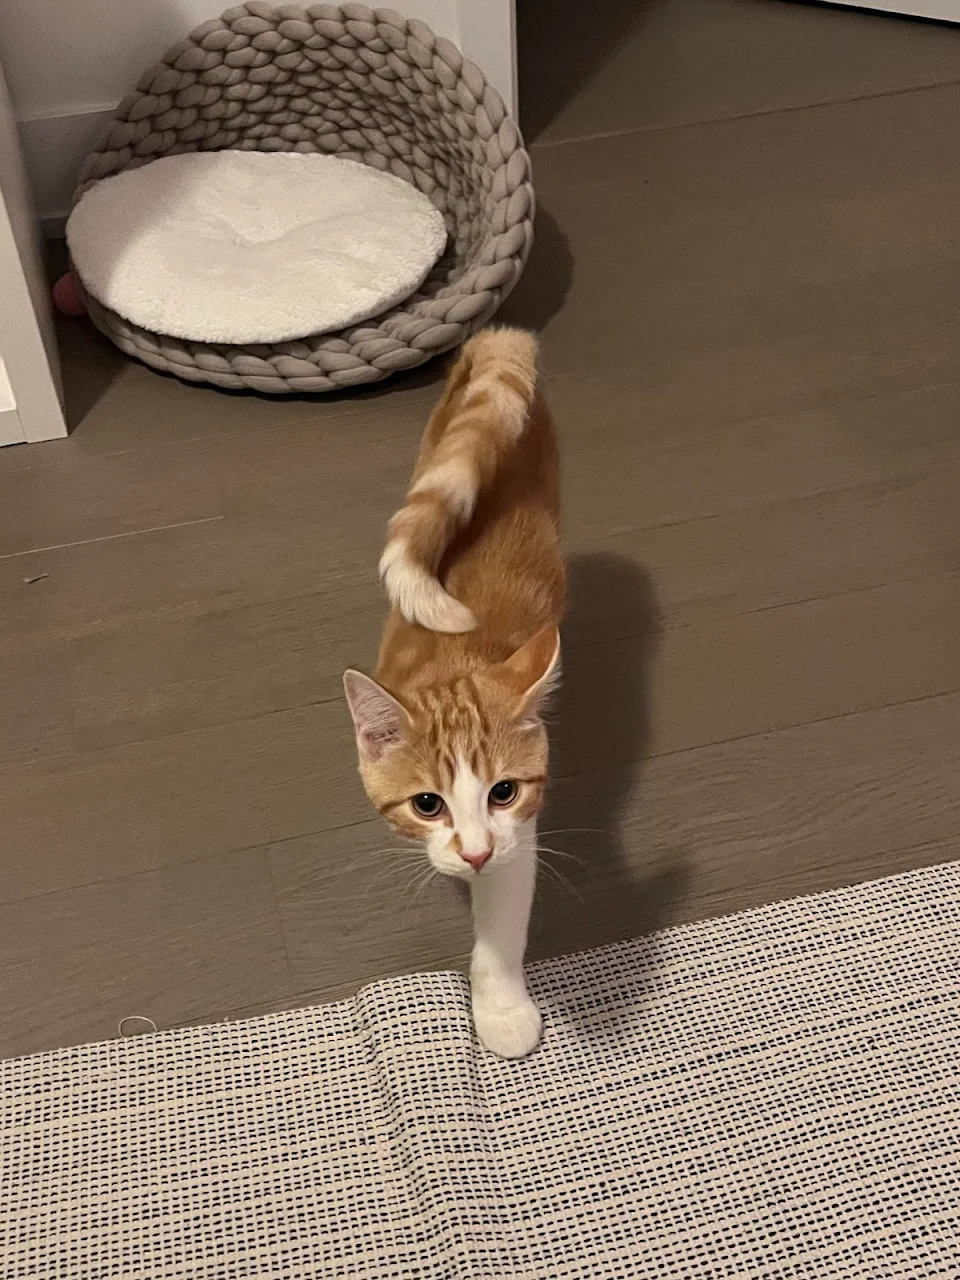 My new kitten’s tail is parallel to his body instead of perpendicular when he’s happy. No signs of discomfort. Is this normal for an 8 week old kitten?